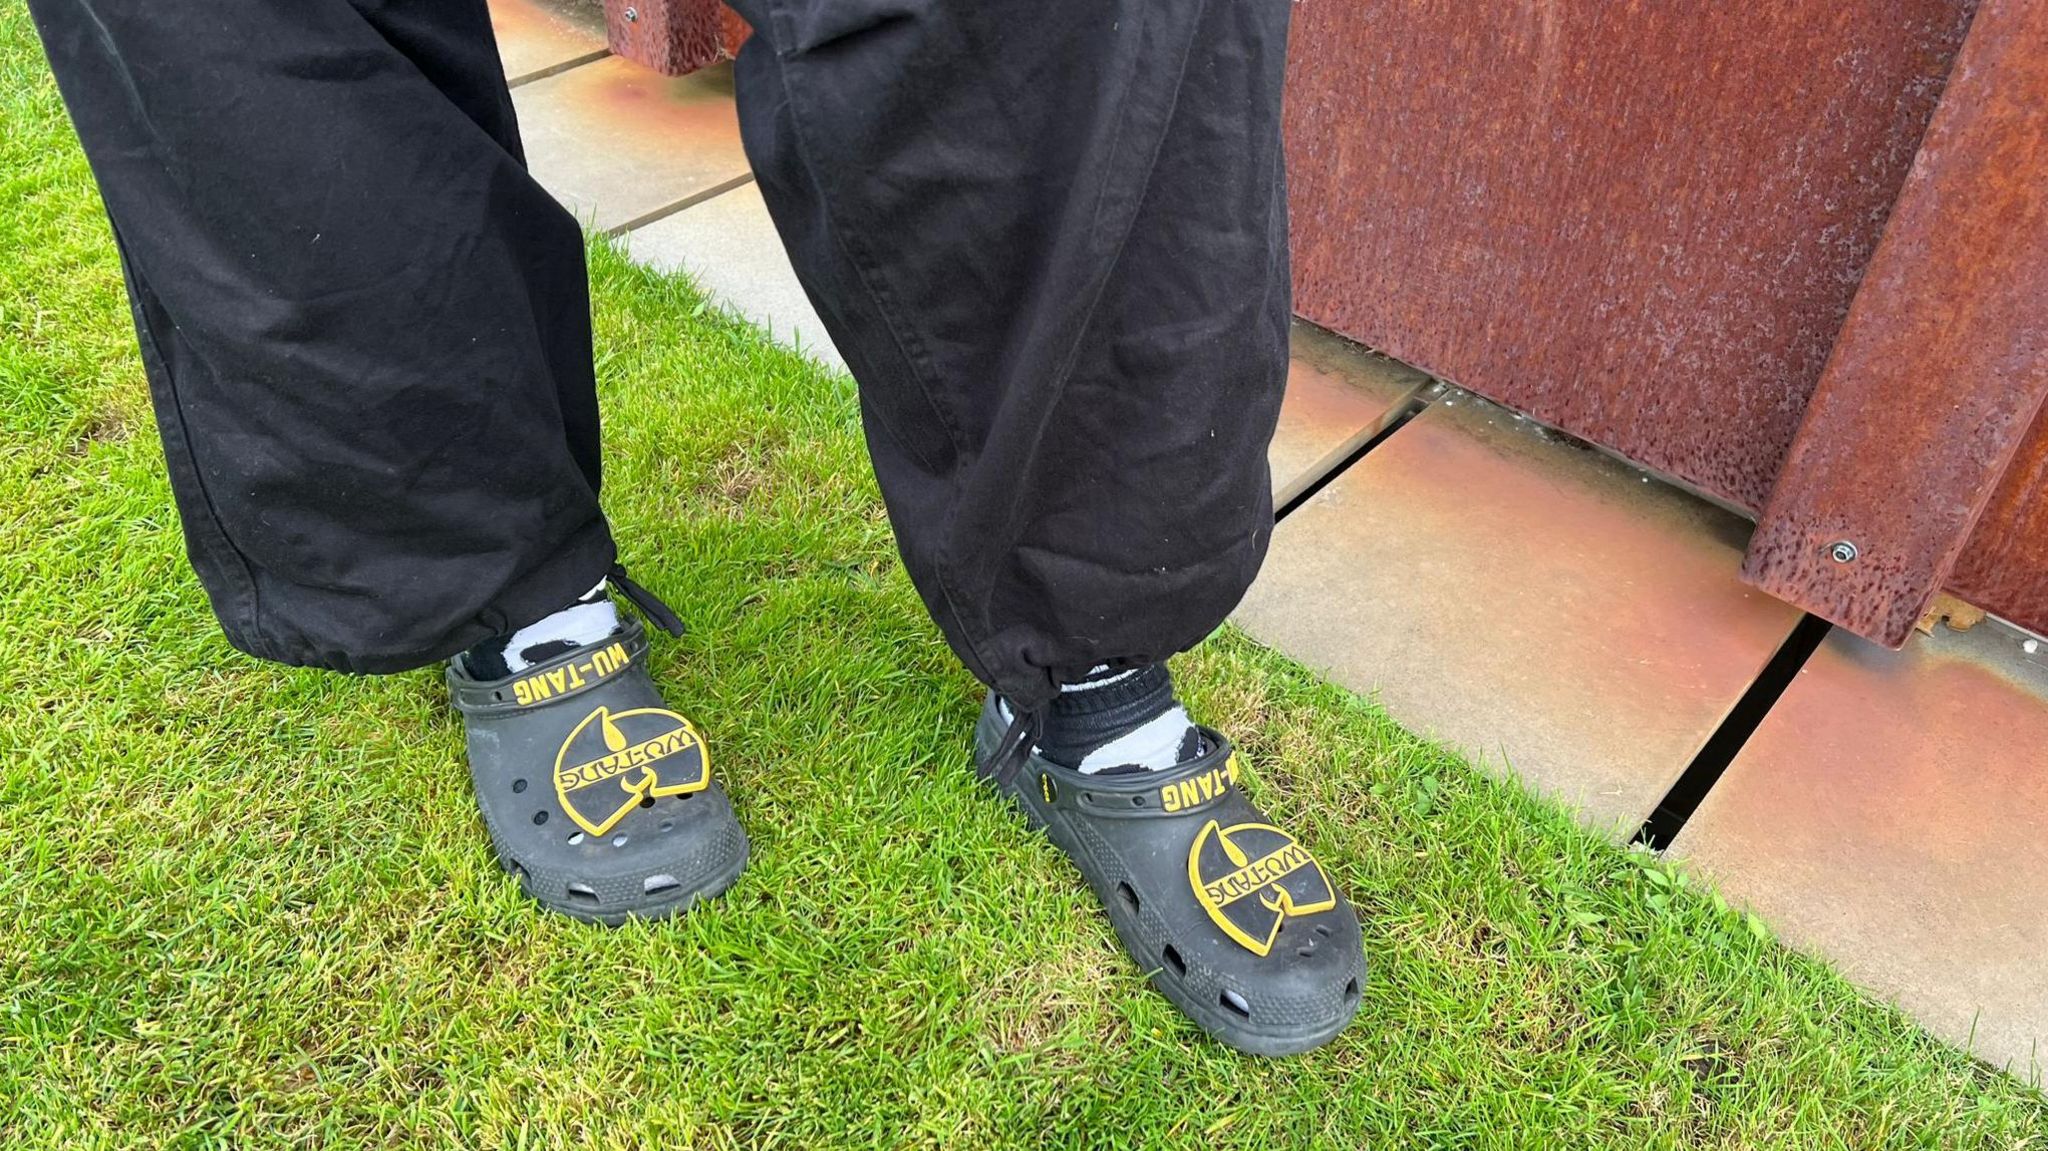 A close up of a pair of crocs decorated with Wu Tang Clan symbols